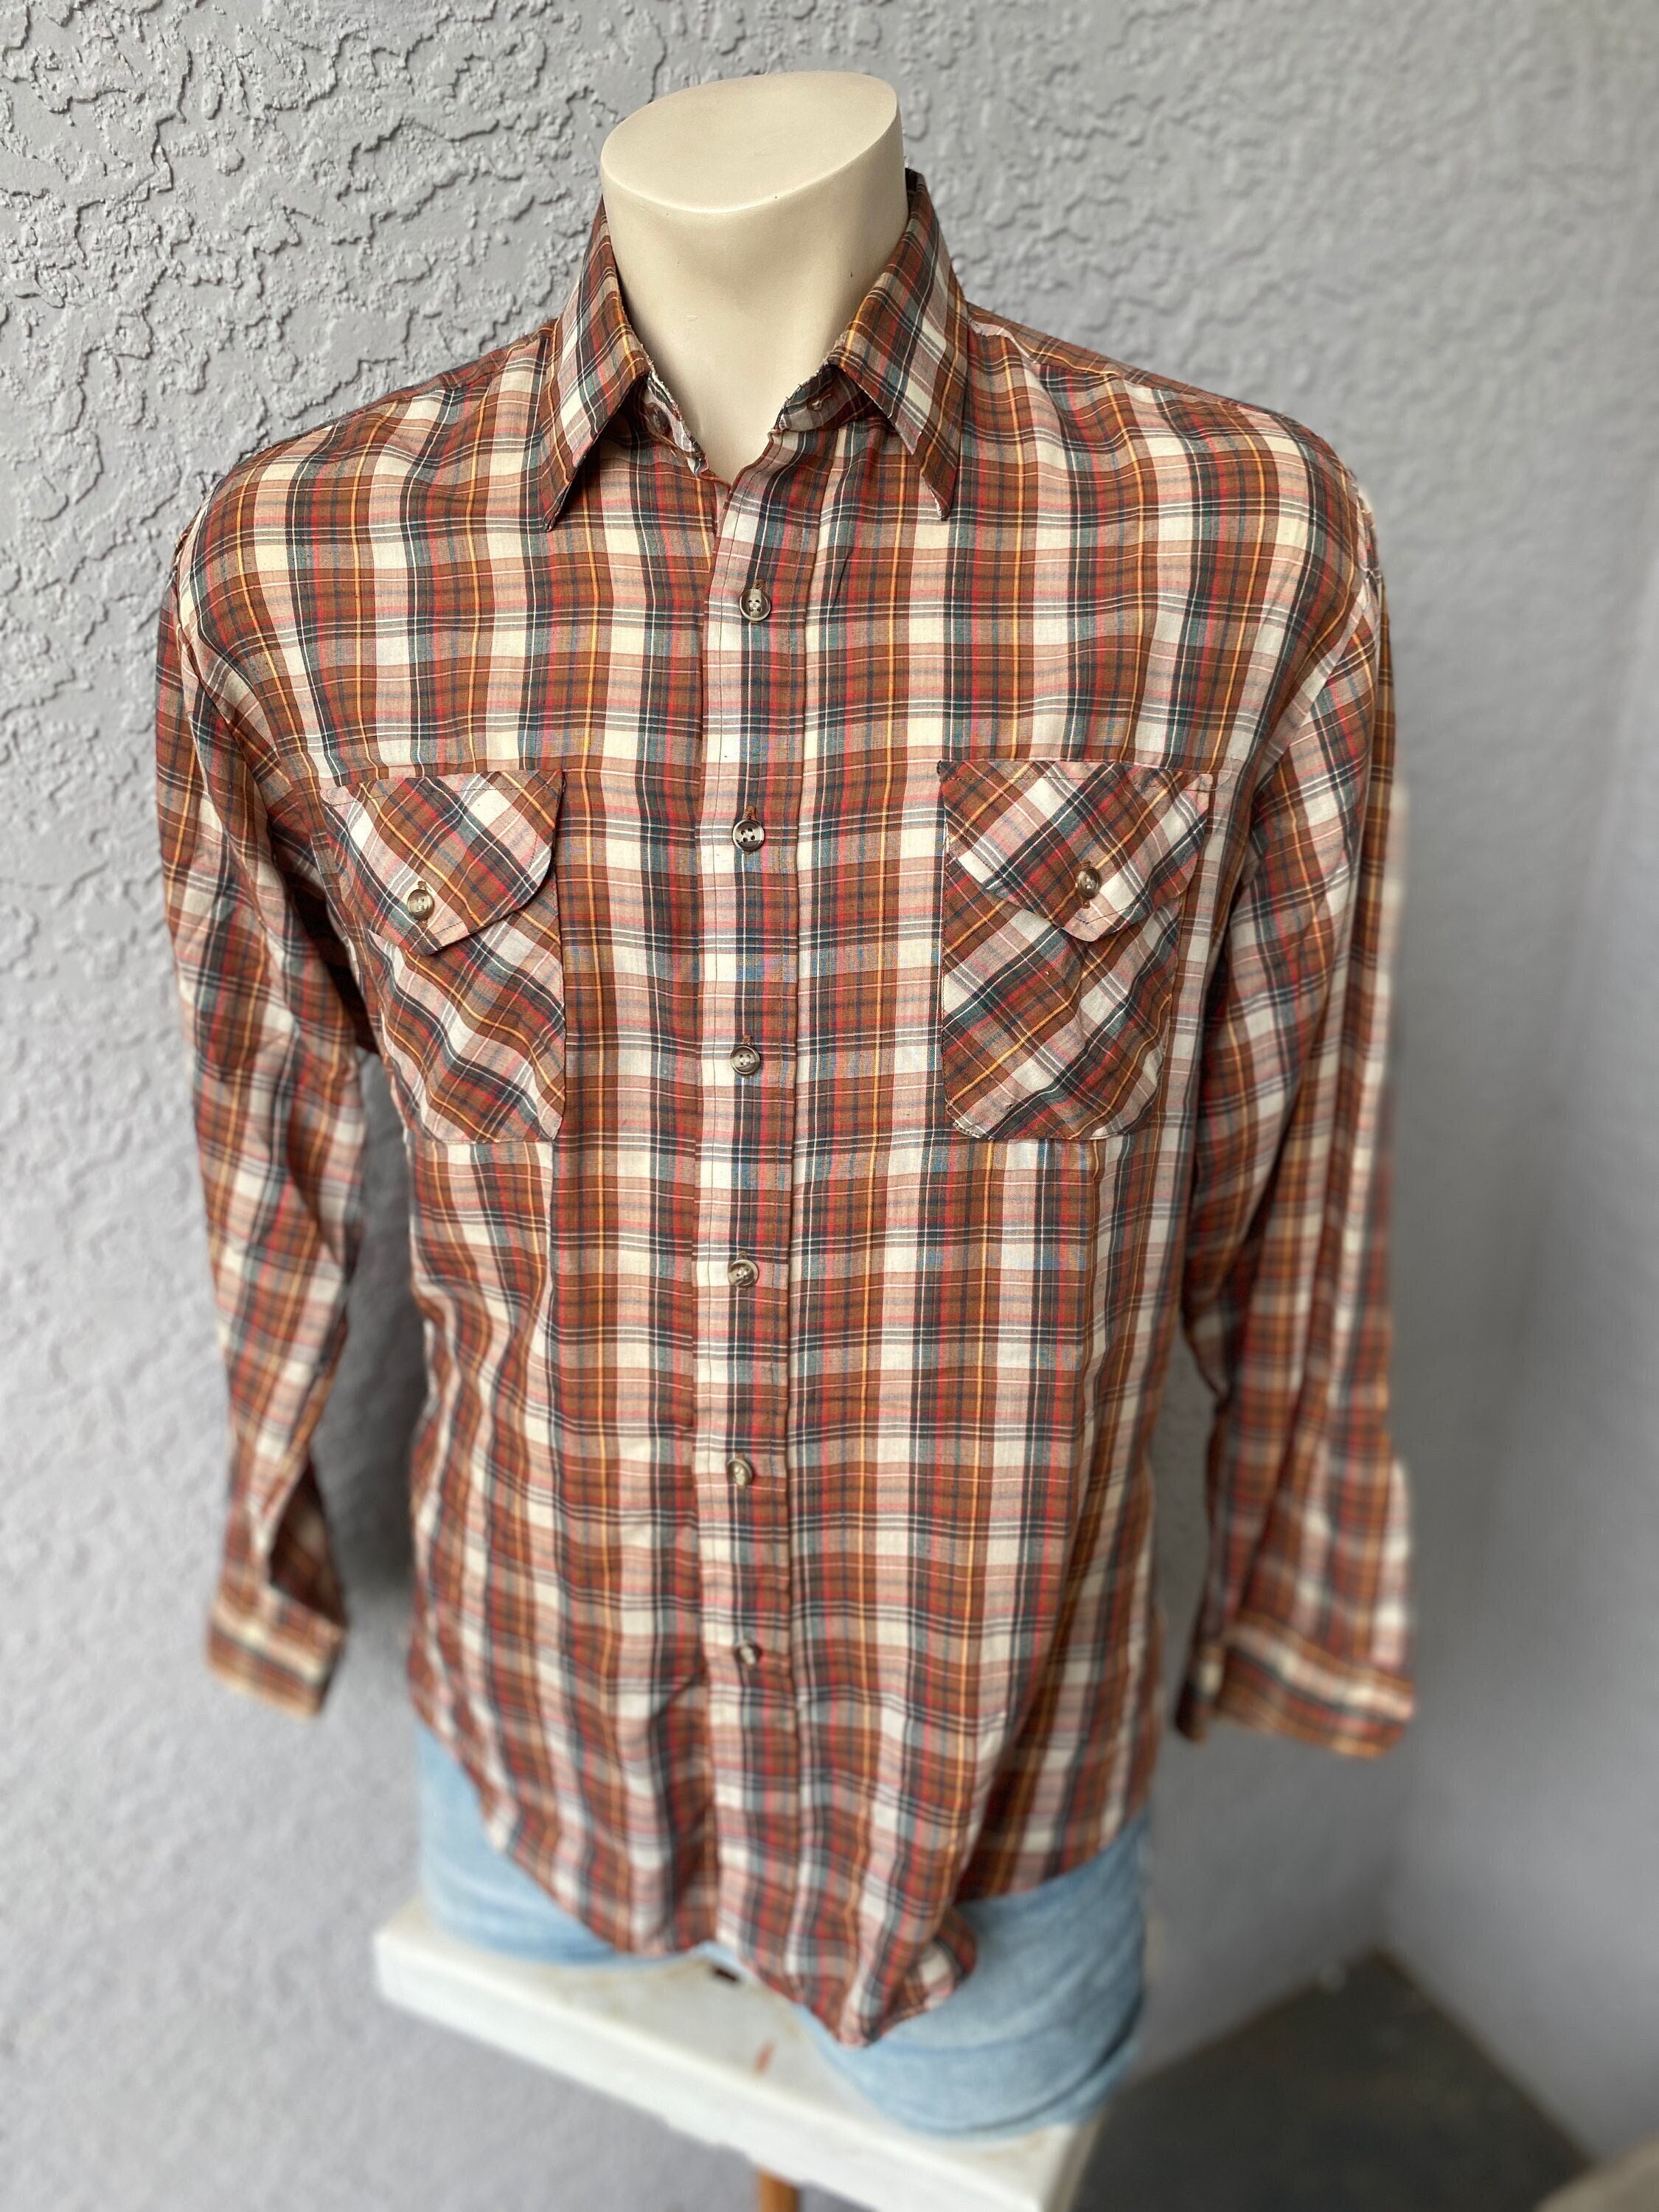 Vintage Pearl Snap No Sleeve Men's Button up Shirt Size XL Hillbilly -   Canada